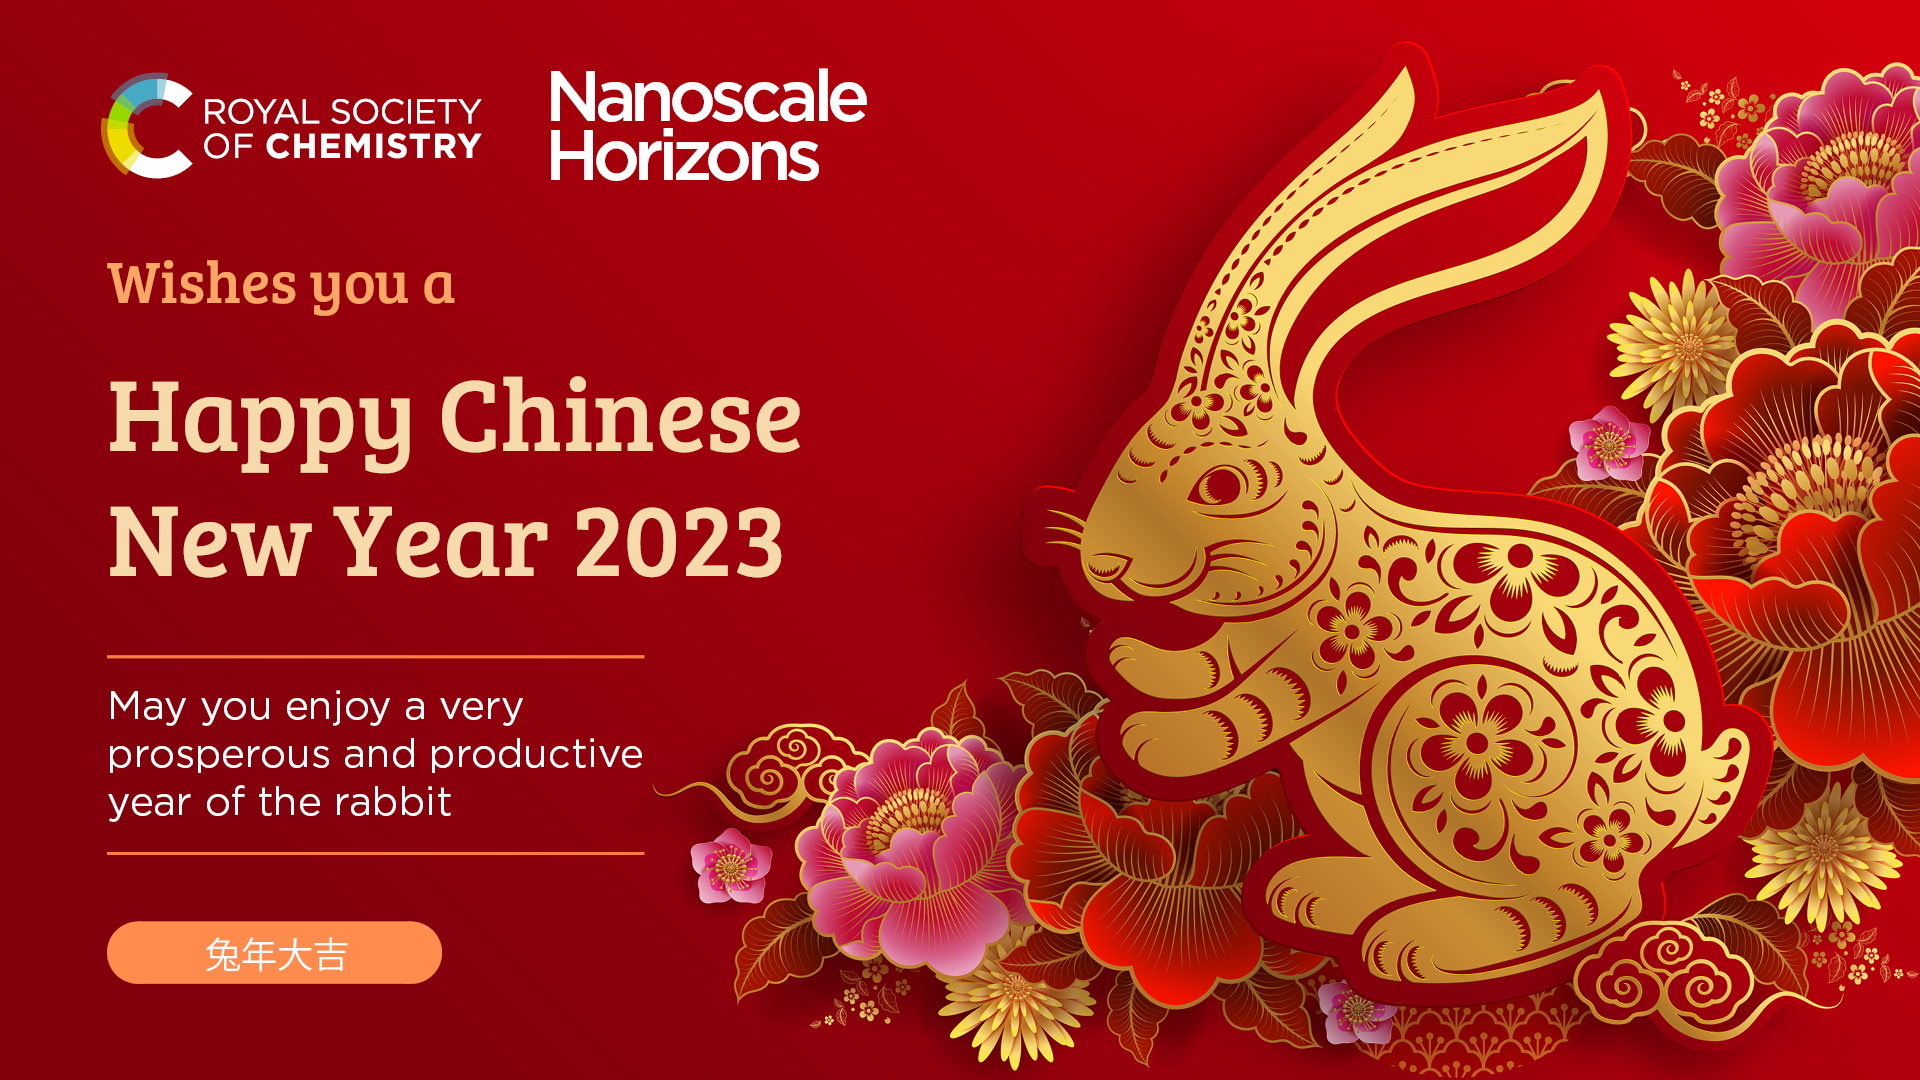 Nanoscale Horizons Chinese New Year promotional graphic with a red background and an image of a gold rabbit surrounded by flowers. Text reads: "Nanoscale Horizons Wishes you a Happy Chinese New Year 2023, May you enjoy a very prosperous and productive year of the rabbit".